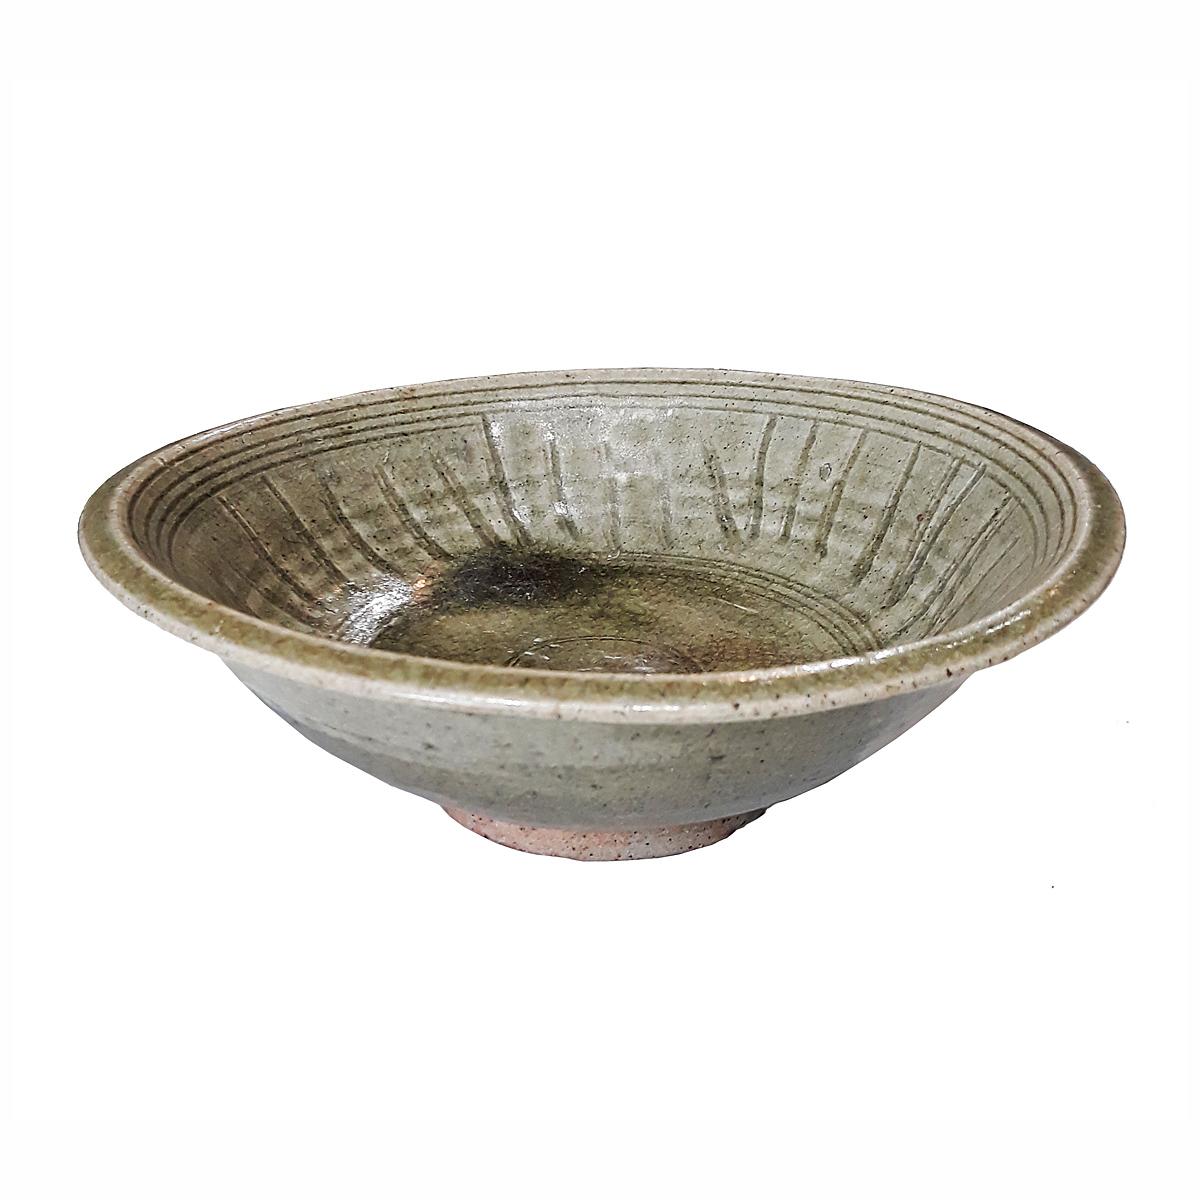 A Celadon bowl from the ancient kilns of Sangkhalok, one of the main centers of Thai ceramics during the Sukhotai period. Well preserved for its age, this plate shows the ancient technique of Celadon glaze, with its traditional green color and the